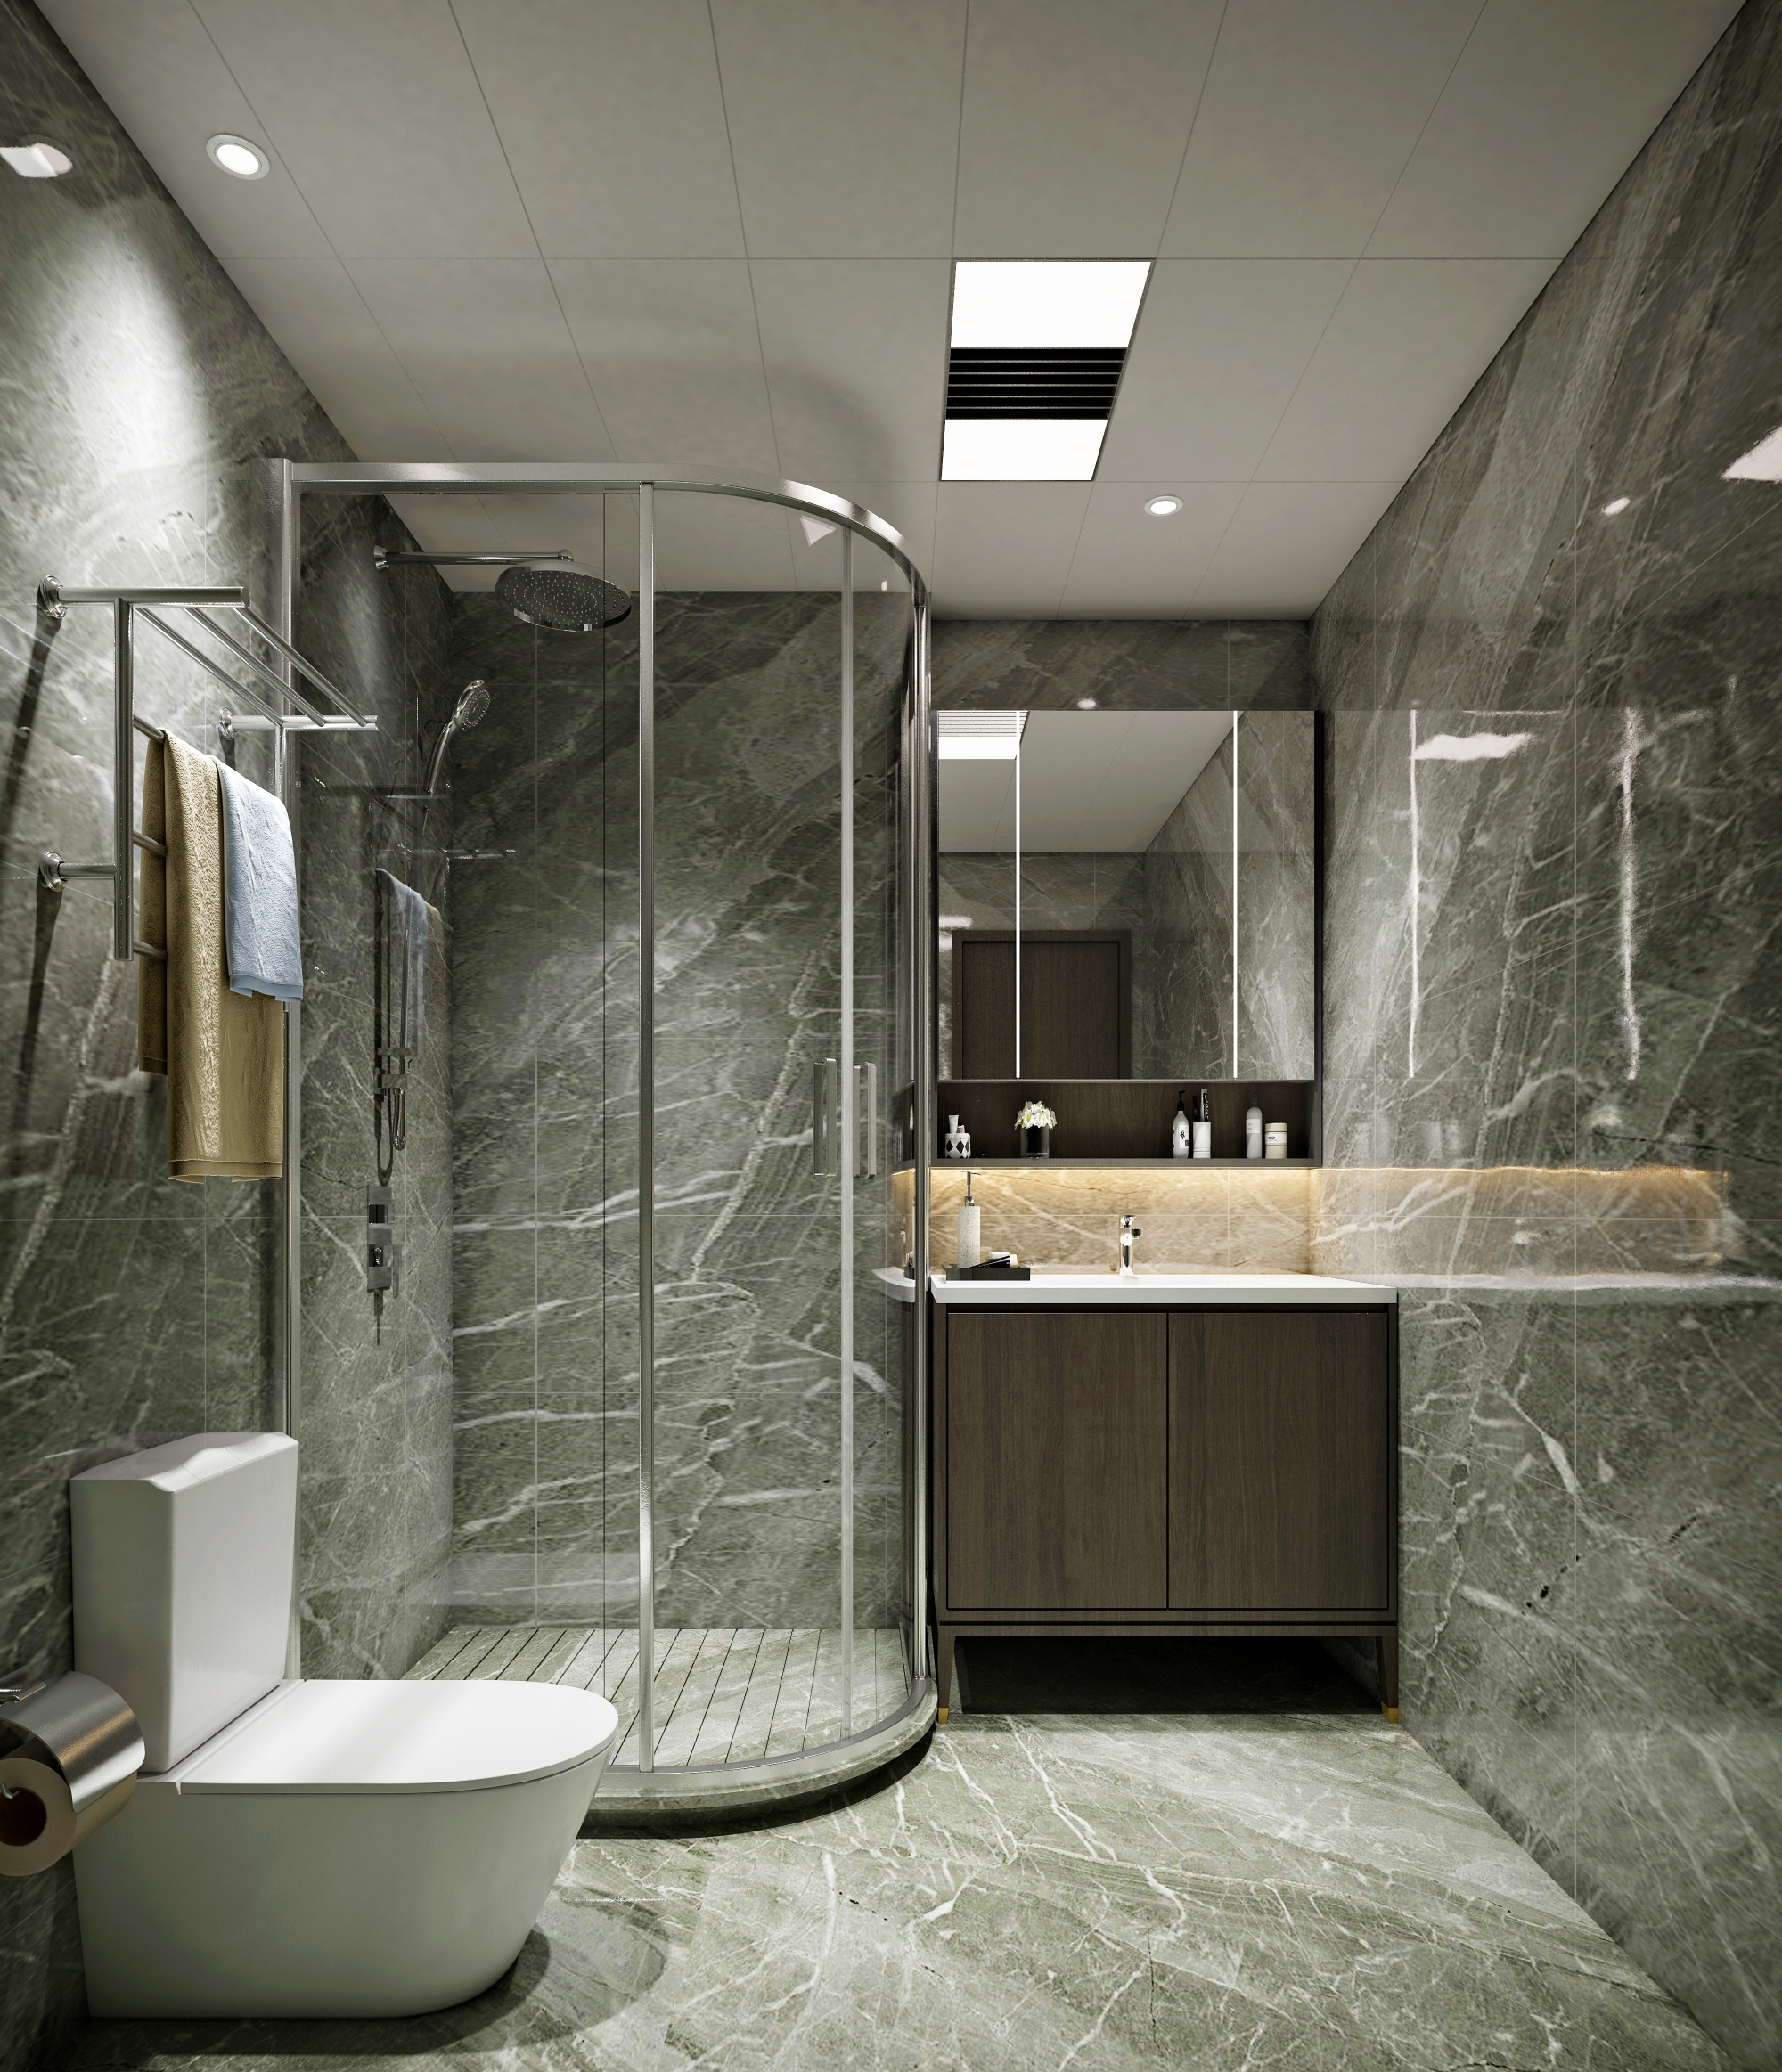 Maximize the functionality of your space with frameless glass shower booth for convenience and openness.